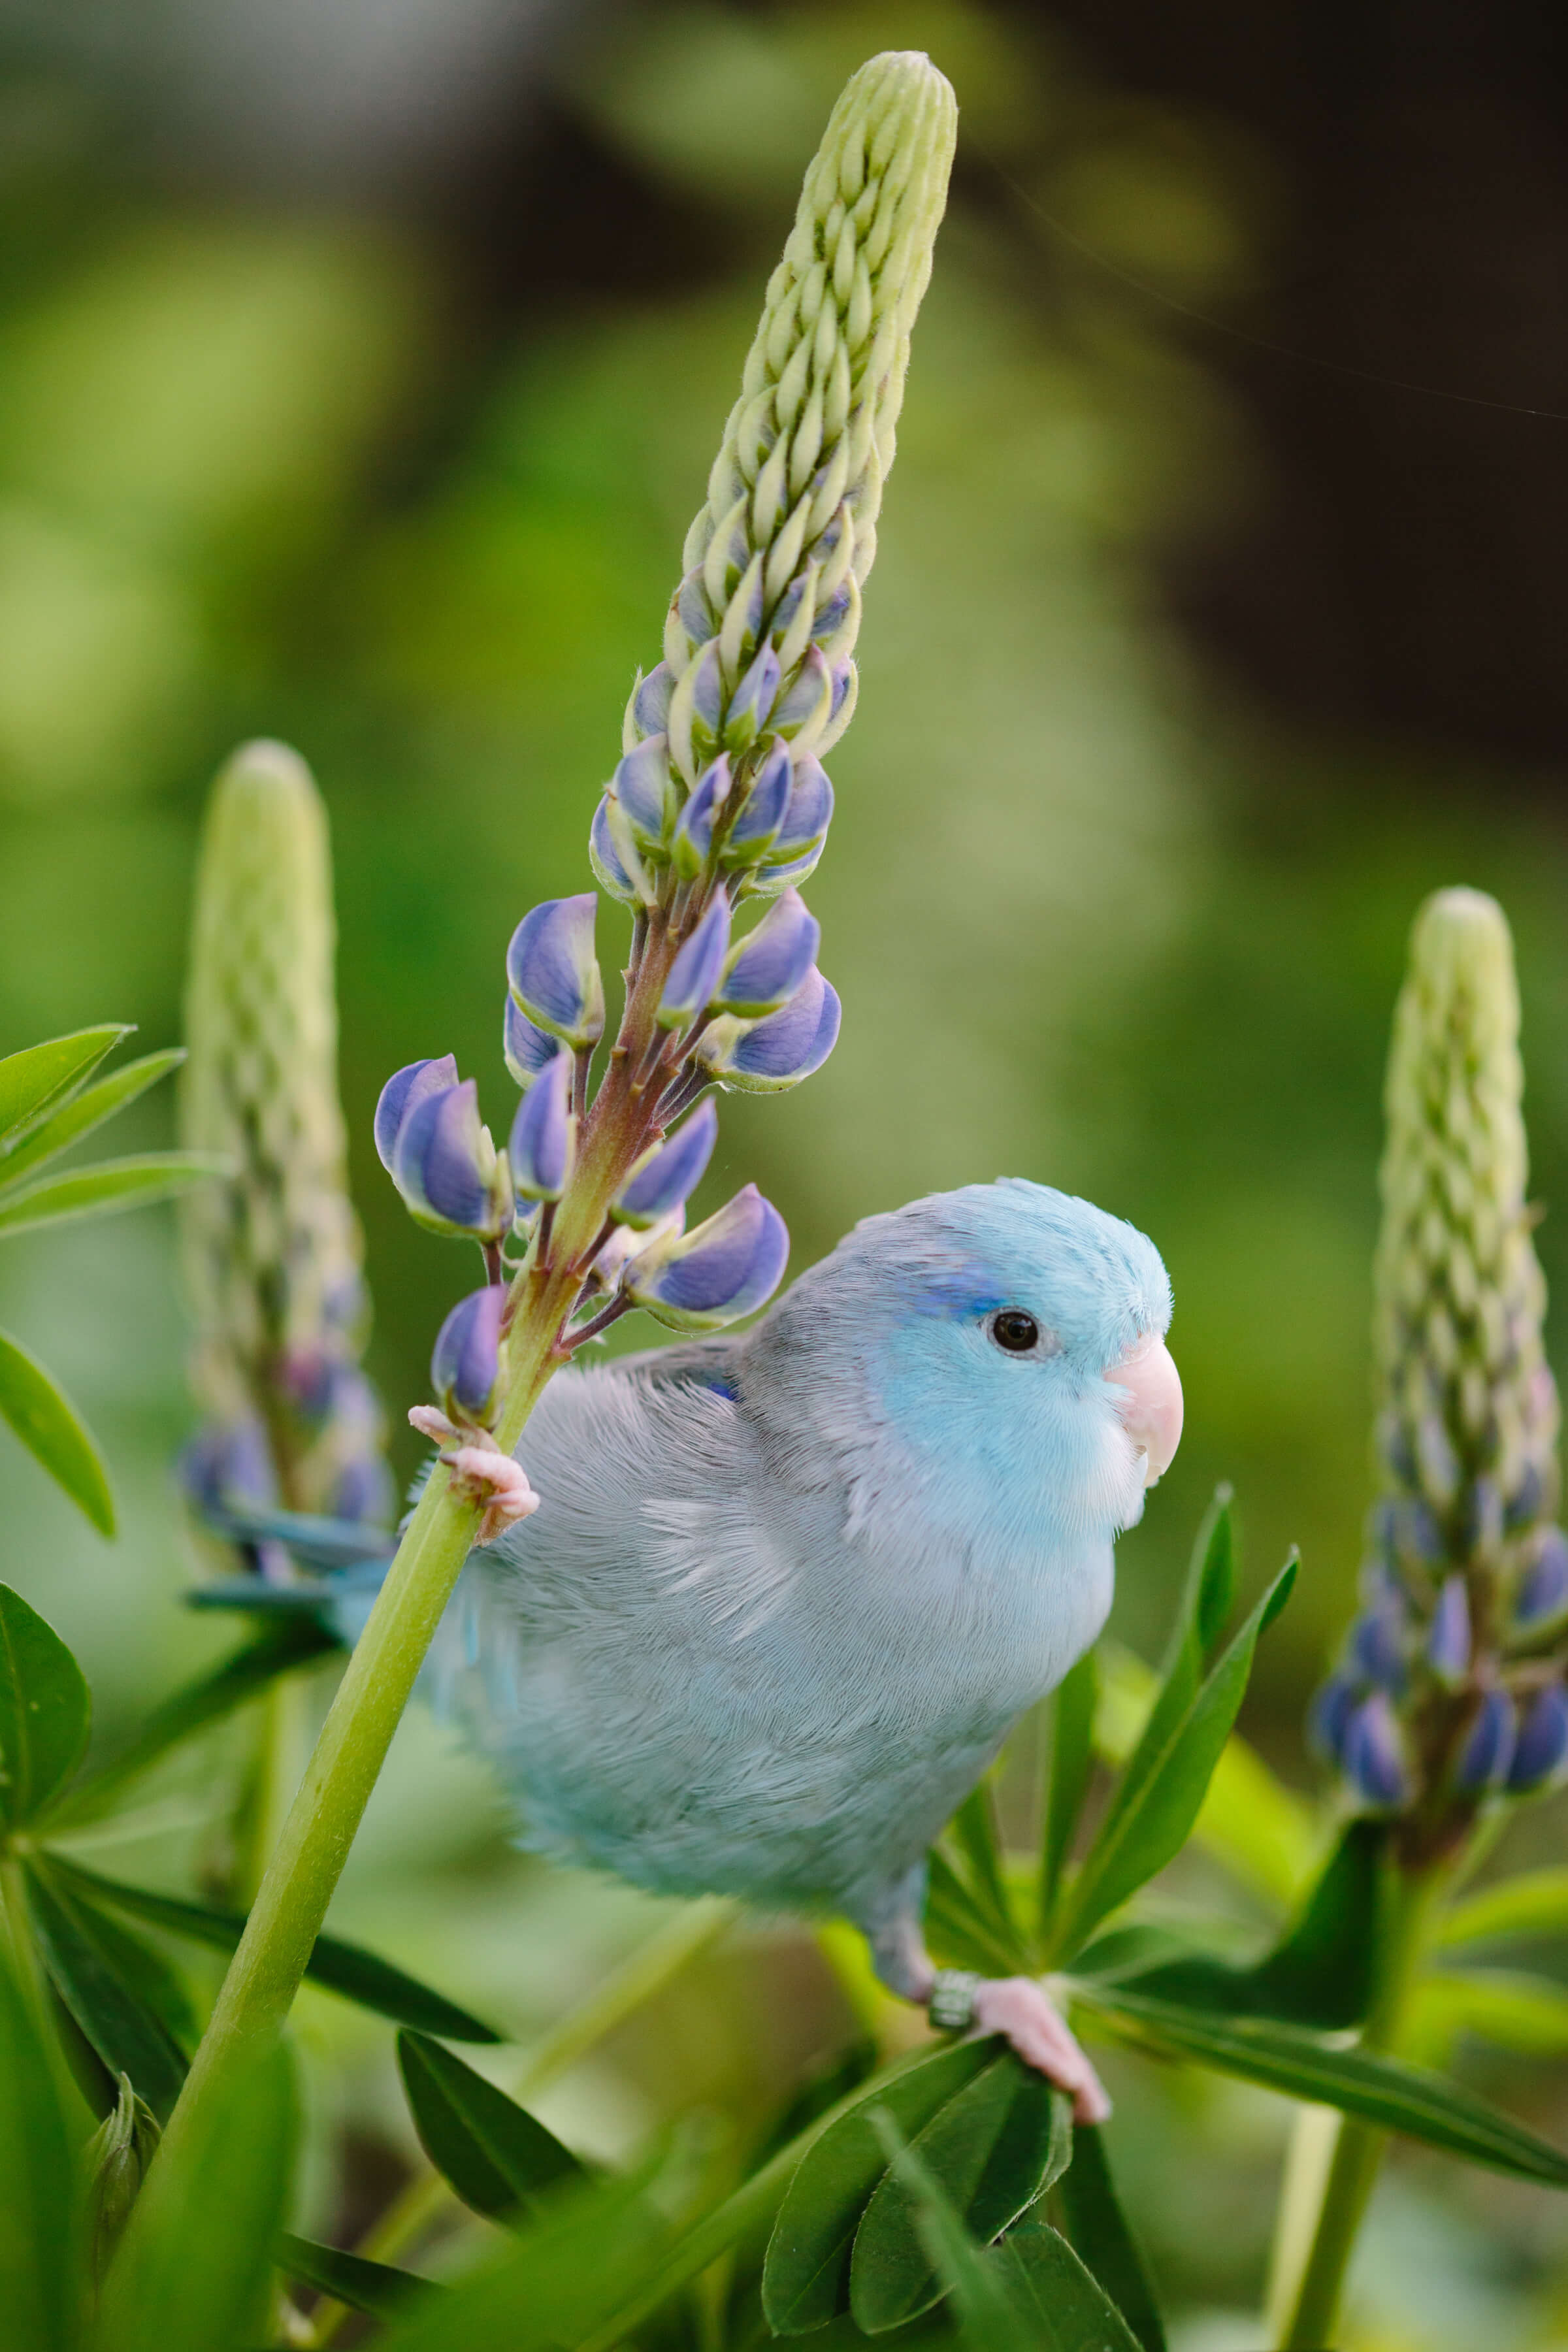 Flash the parrotlet does the splits while holding onto lupine flowers